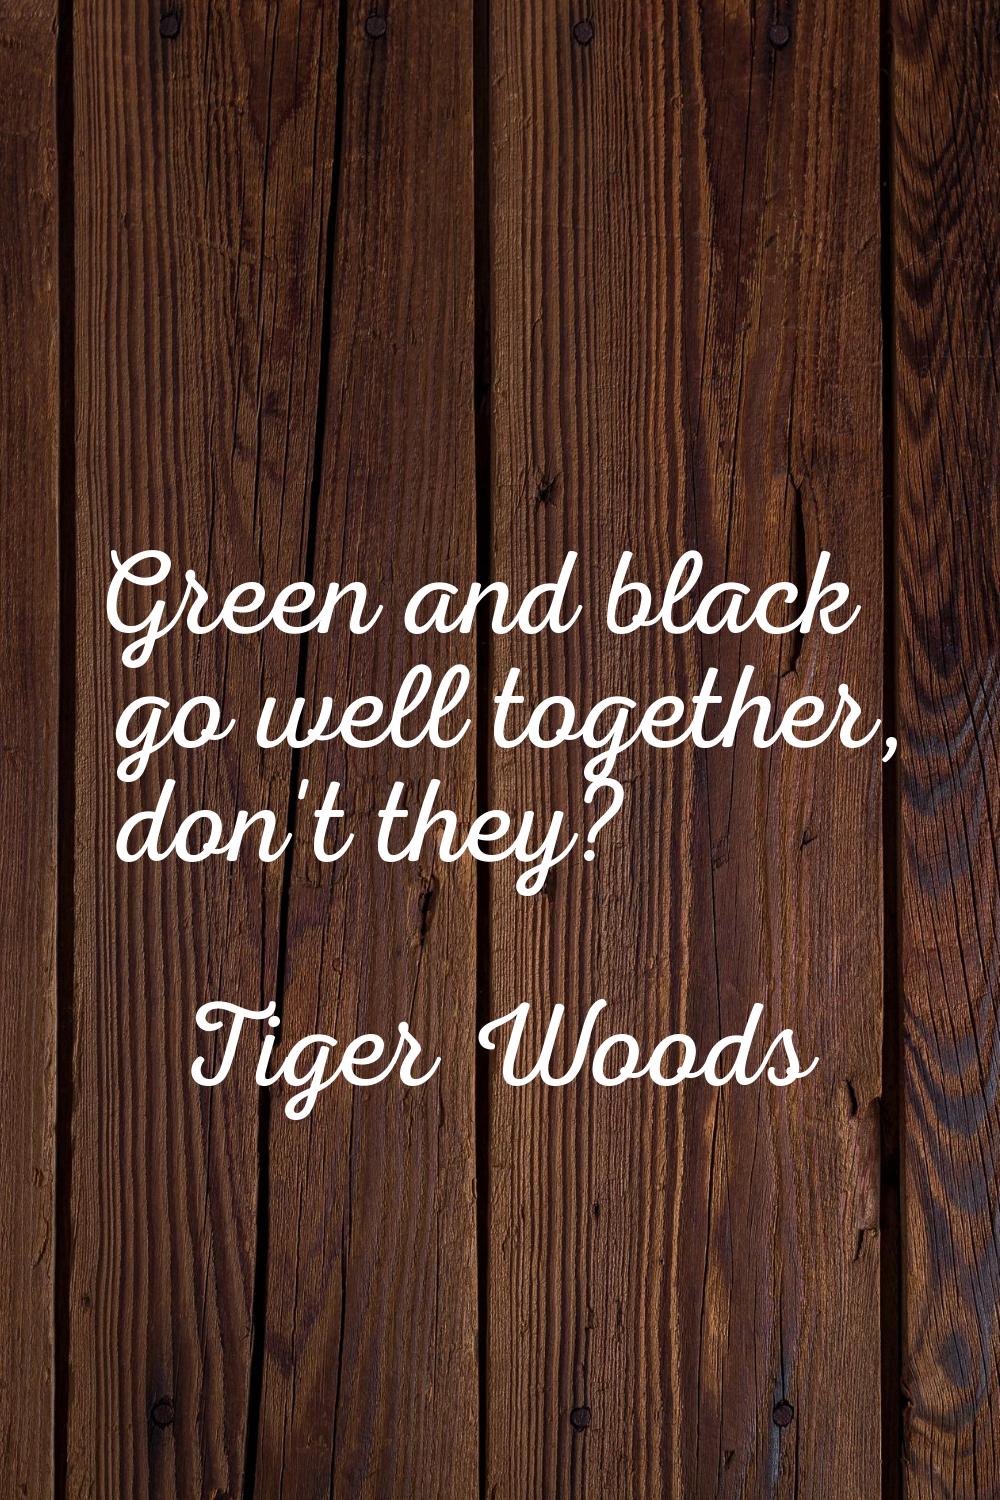 Green and black go well together, don't they?